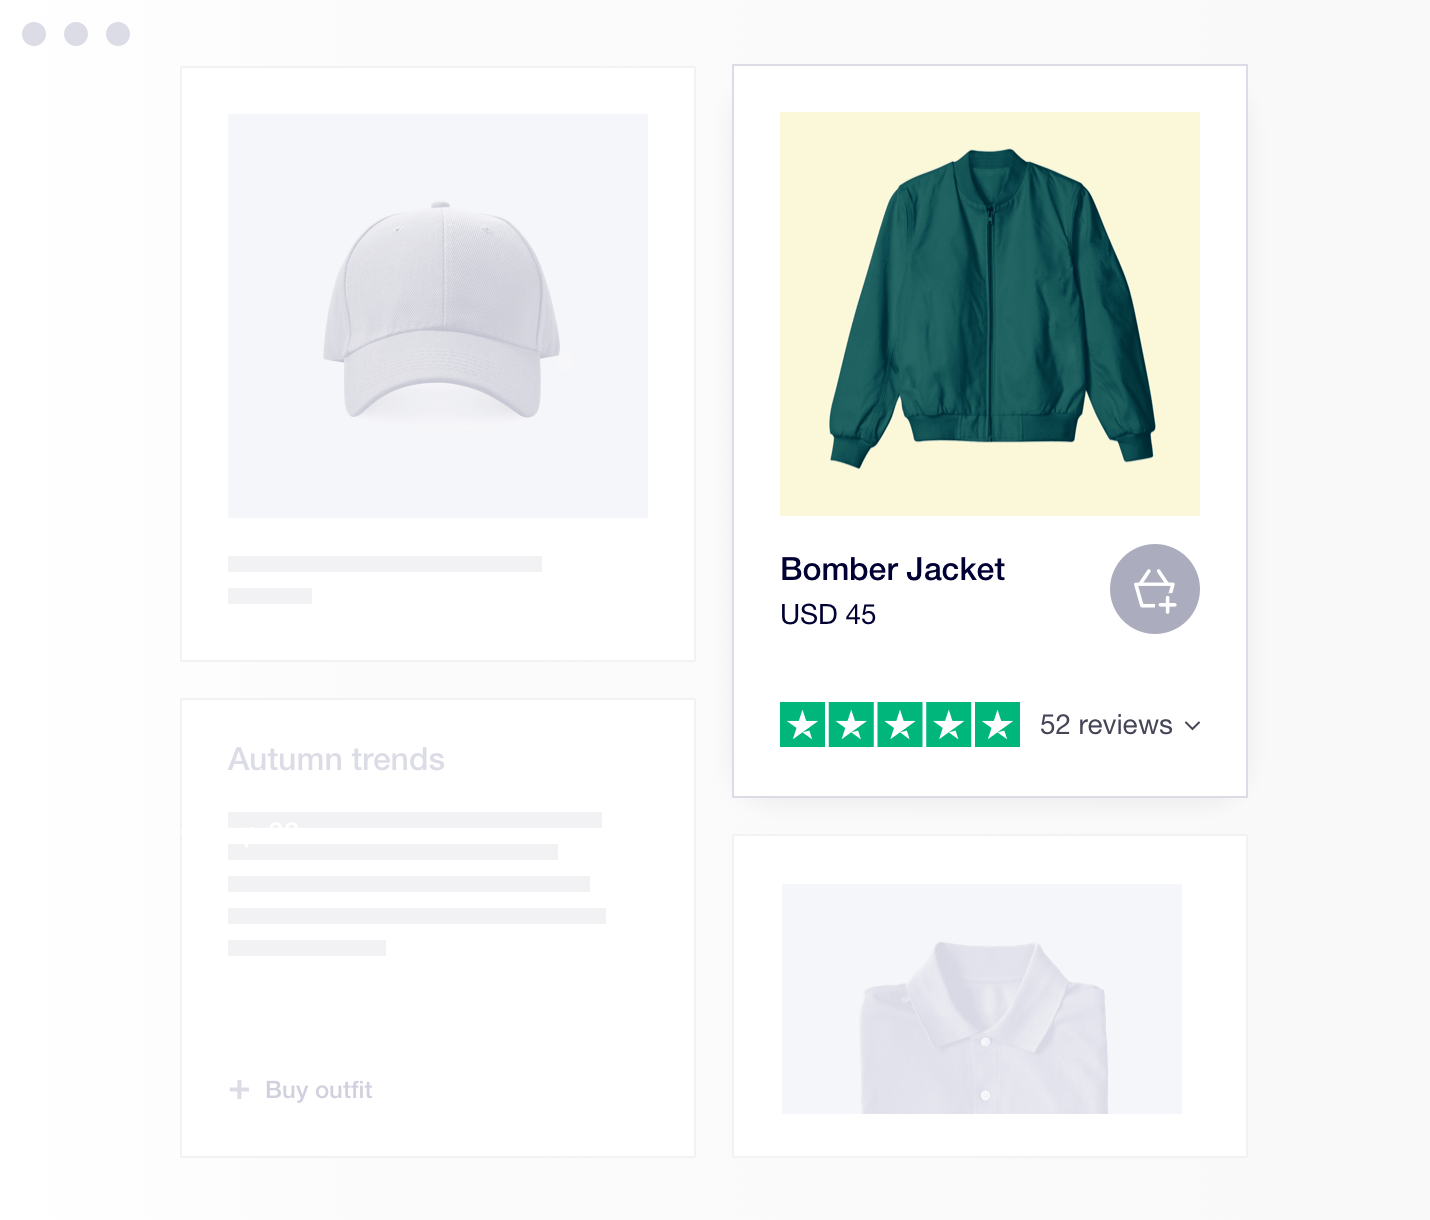 Product illustration of Trustpilot product reviews featuring a bomber jacket listed with price and Trustpilot rating/ stars